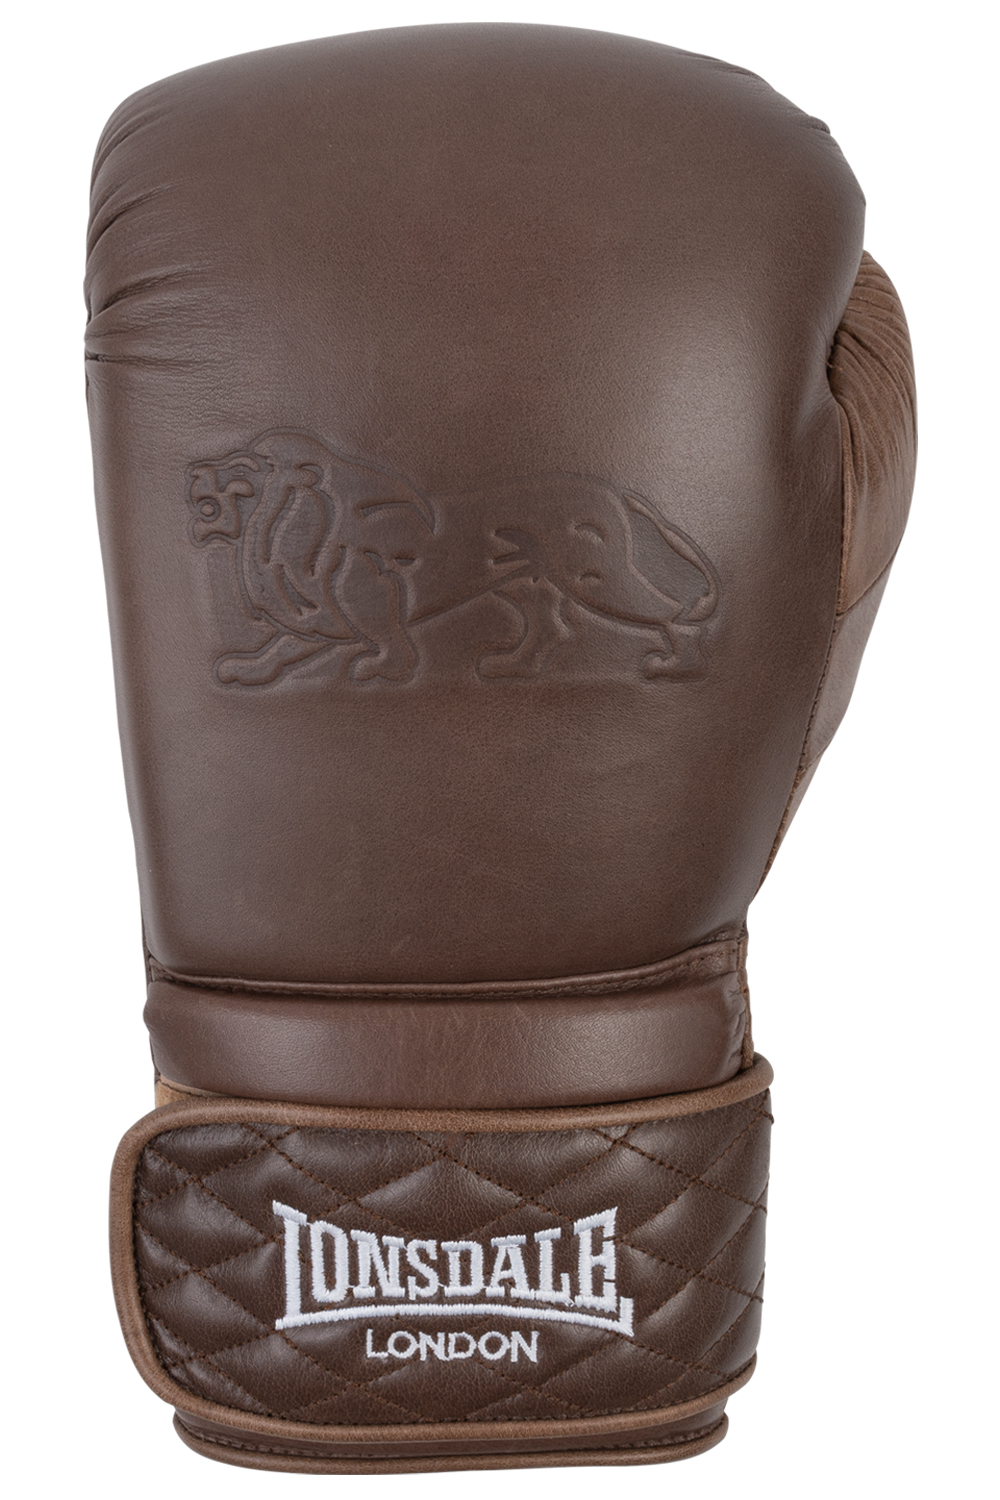 Lonsdale Leather Boxing Gloves